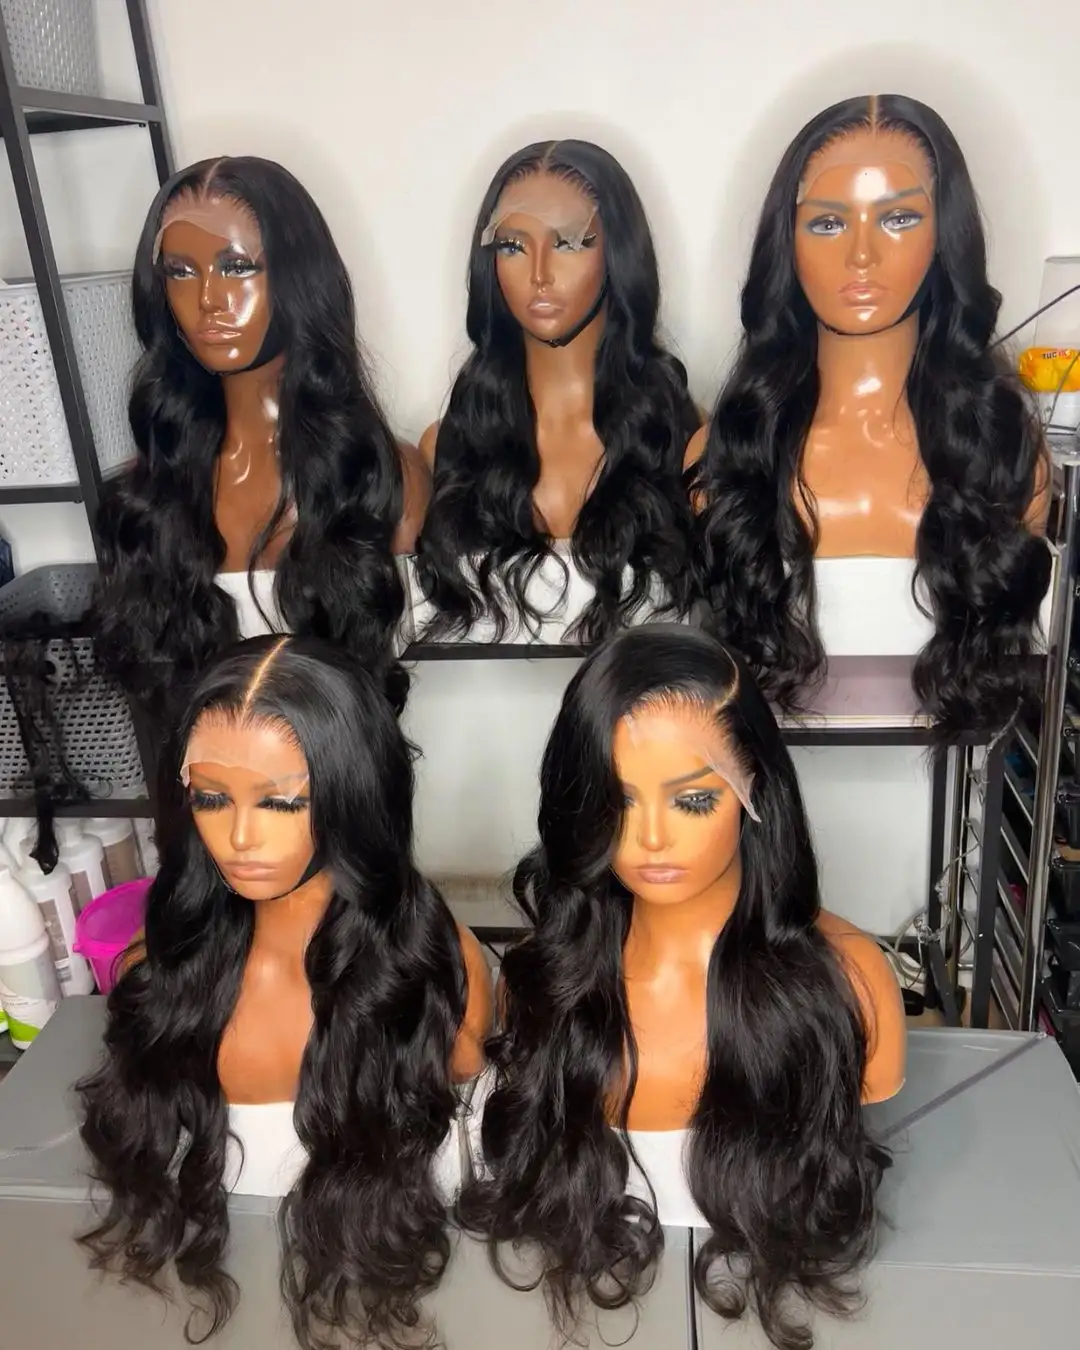 Bone Straight lace front Human Hair Wigs For Black Women,pre pluck 13x4 13x6 hd Human Hair Lace Front Wigs,Hd Lace Frontal Wig